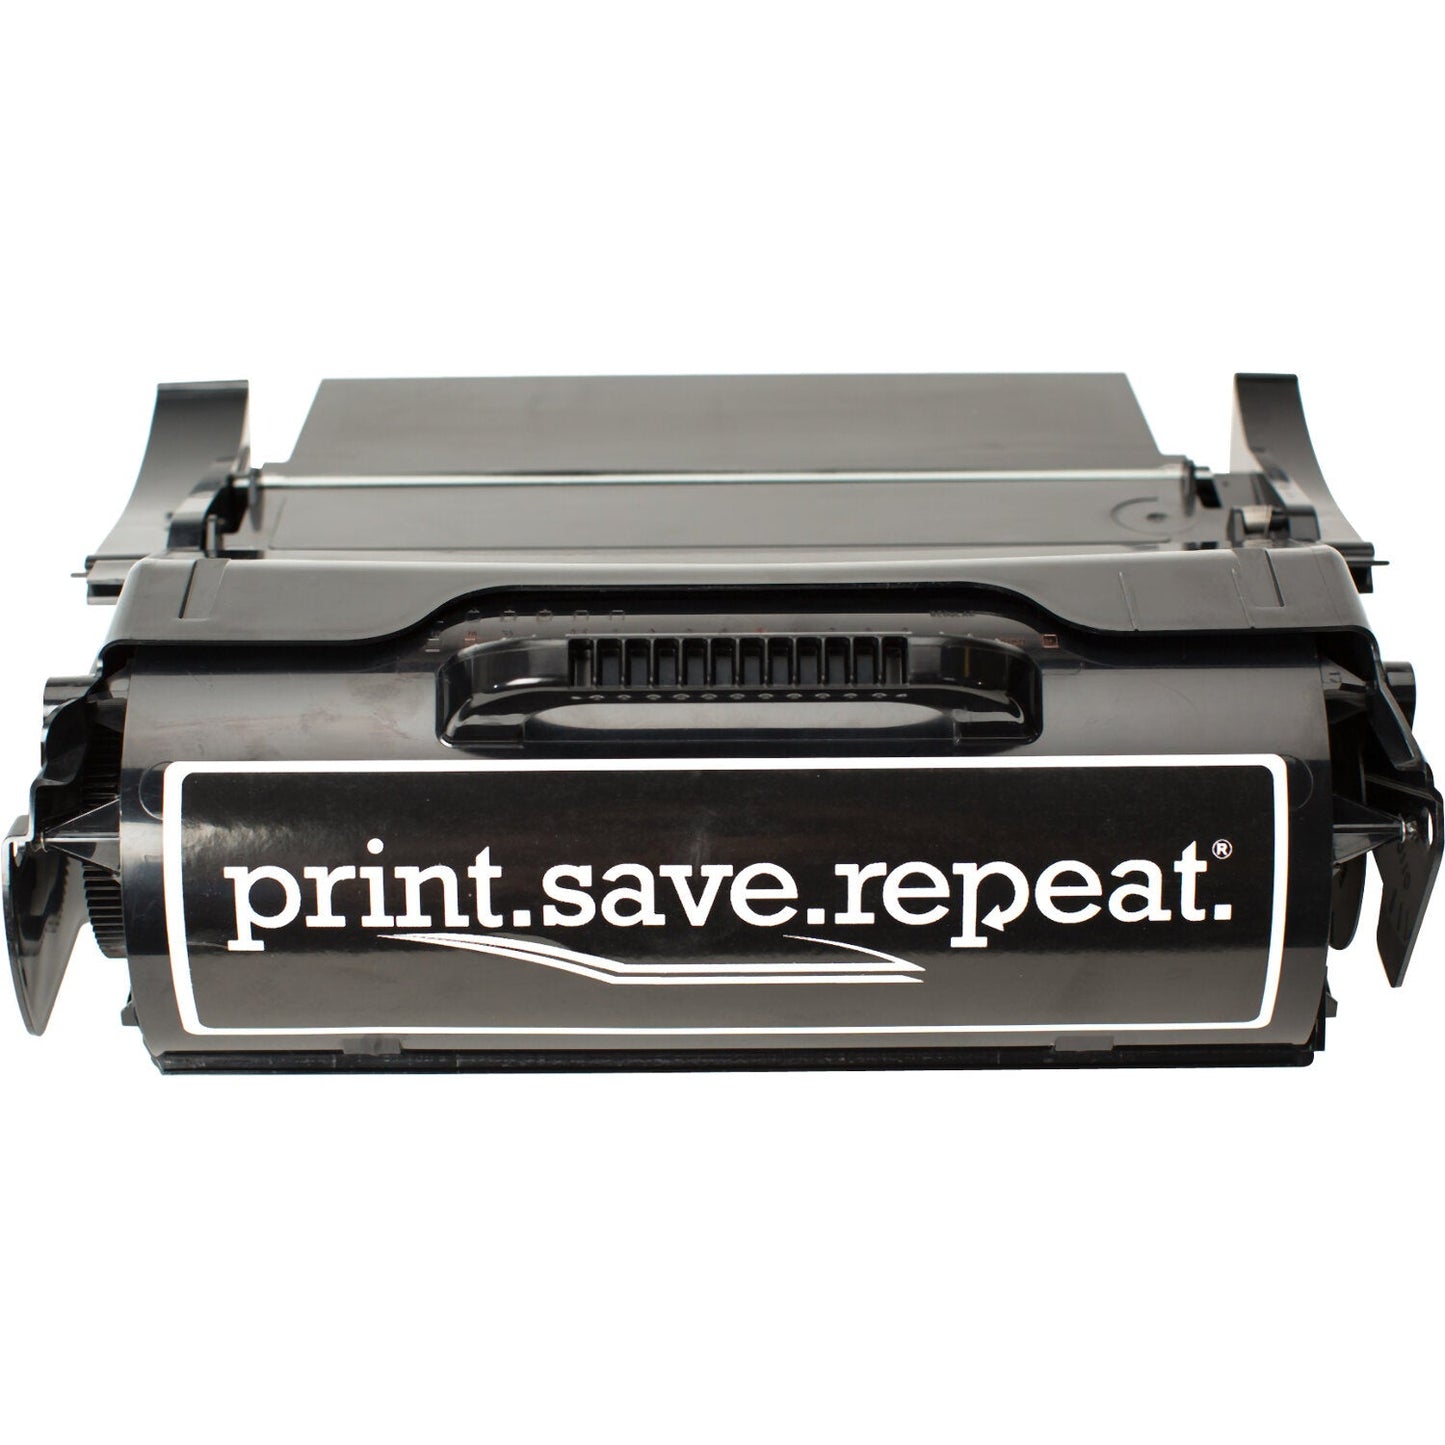 Print.Save.Repeat. Lexmark T654X21A Extra High Yield Remanufactured Toner Cartridge for T654, T656, TS654, TS656 [36,000 Pages]